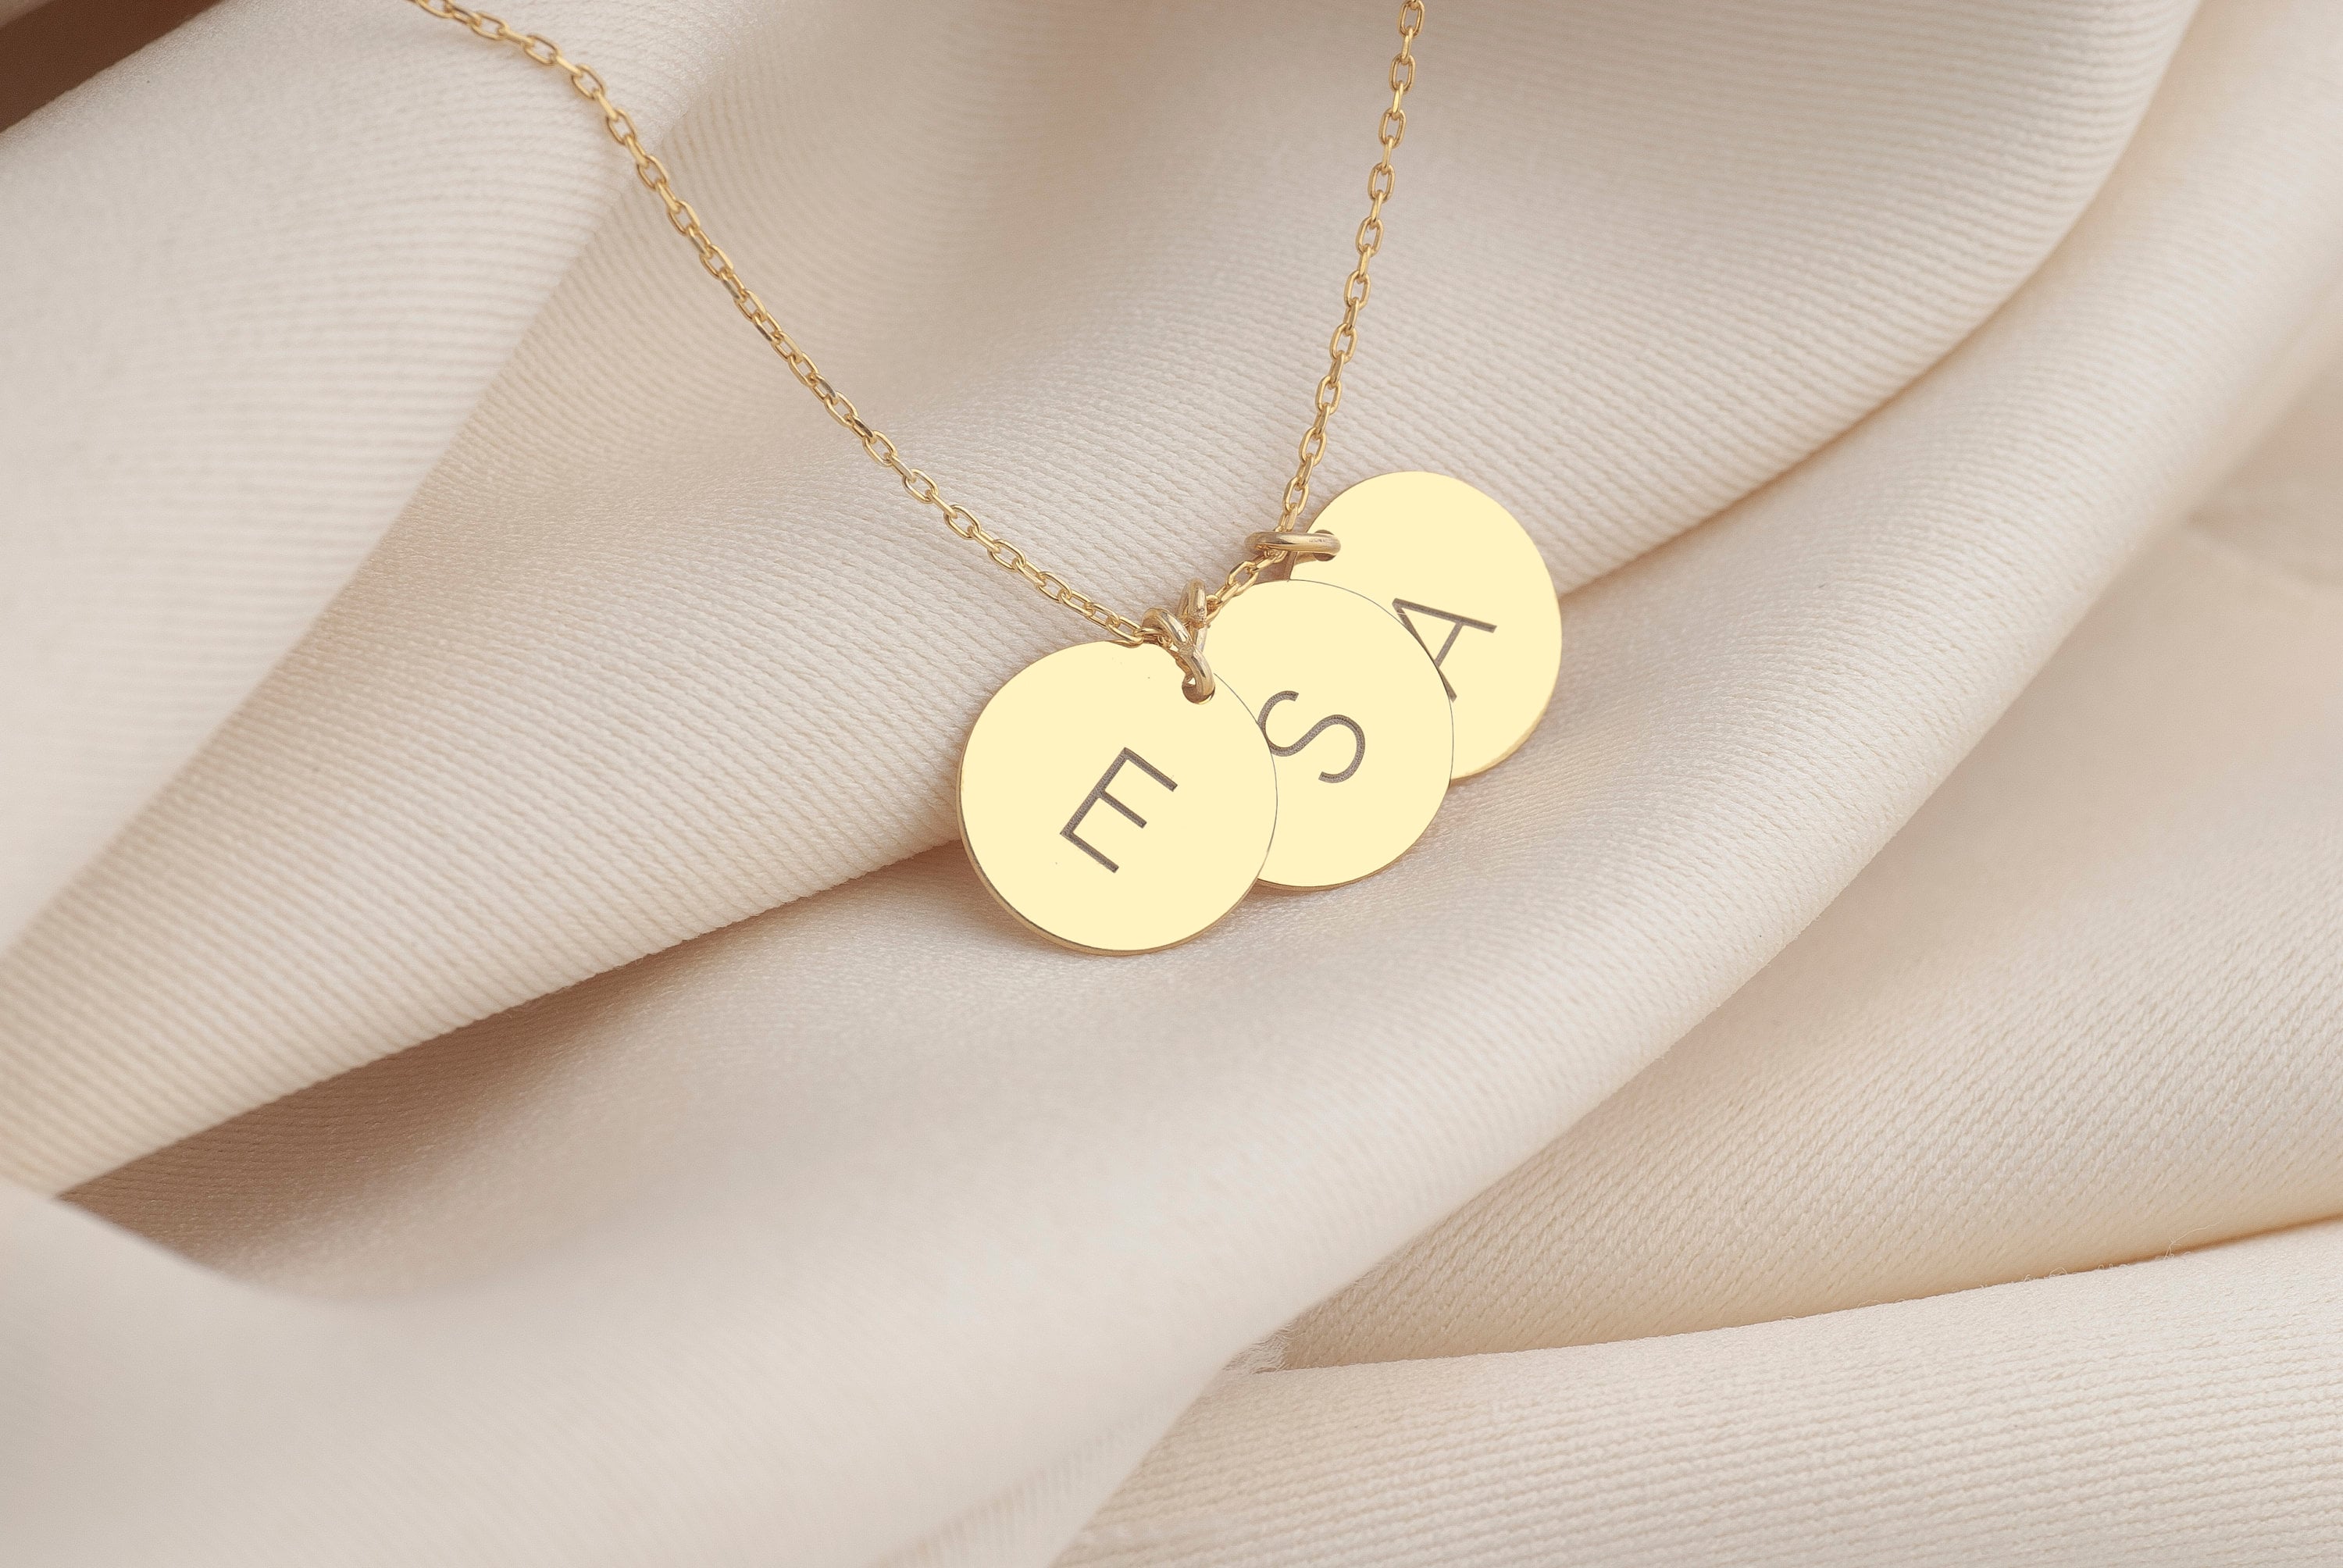 Gold Lula - Reeded Edge Vintage Initial Charm